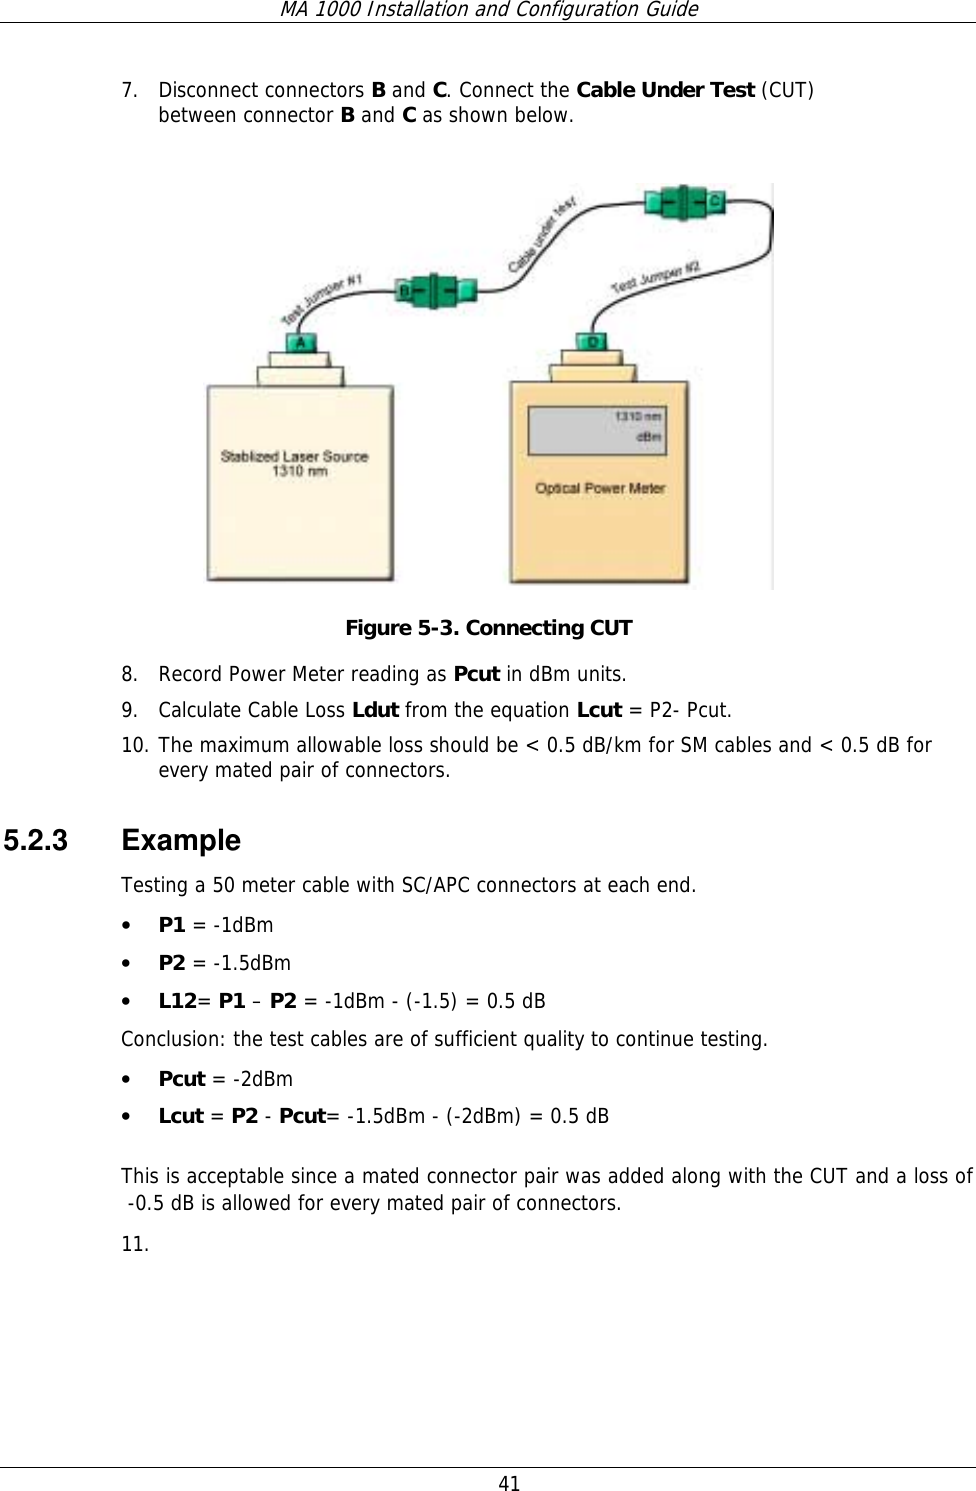 MA 1000 Installation and Configuration Guide  41 7. Disconnect connectors B and C. Connect the Cable Under Test (CUT) between connector B and C as shown below.   Figure  5-3. Connecting CUT 8. Record Power Meter reading as Pcut in dBm units.  9. Calculate Cable Loss Ldut from the equation Lcut = P2- Pcut.  10. The maximum allowable loss should be &lt; 0.5 dB/km for SM cables and &lt; 0.5 dB for every mated pair of connectors. 5.2.3 Example Testing a 50 meter cable with SC/APC connectors at each end. • P1 = -1dBm • P2 = -1.5dBm • L12= P1 – P2 = -1dBm - (-1.5) = 0.5 dB Conclusion: the test cables are of sufficient quality to continue testing. • Pcut = -2dBm • Lcut = P2 - Pcut= -1.5dBm - (-2dBm) = 0.5 dB  This is acceptable since a mated connector pair was added along with the CUT and a loss of   -0.5 dB is allowed for every mated pair of connectors.  11.  